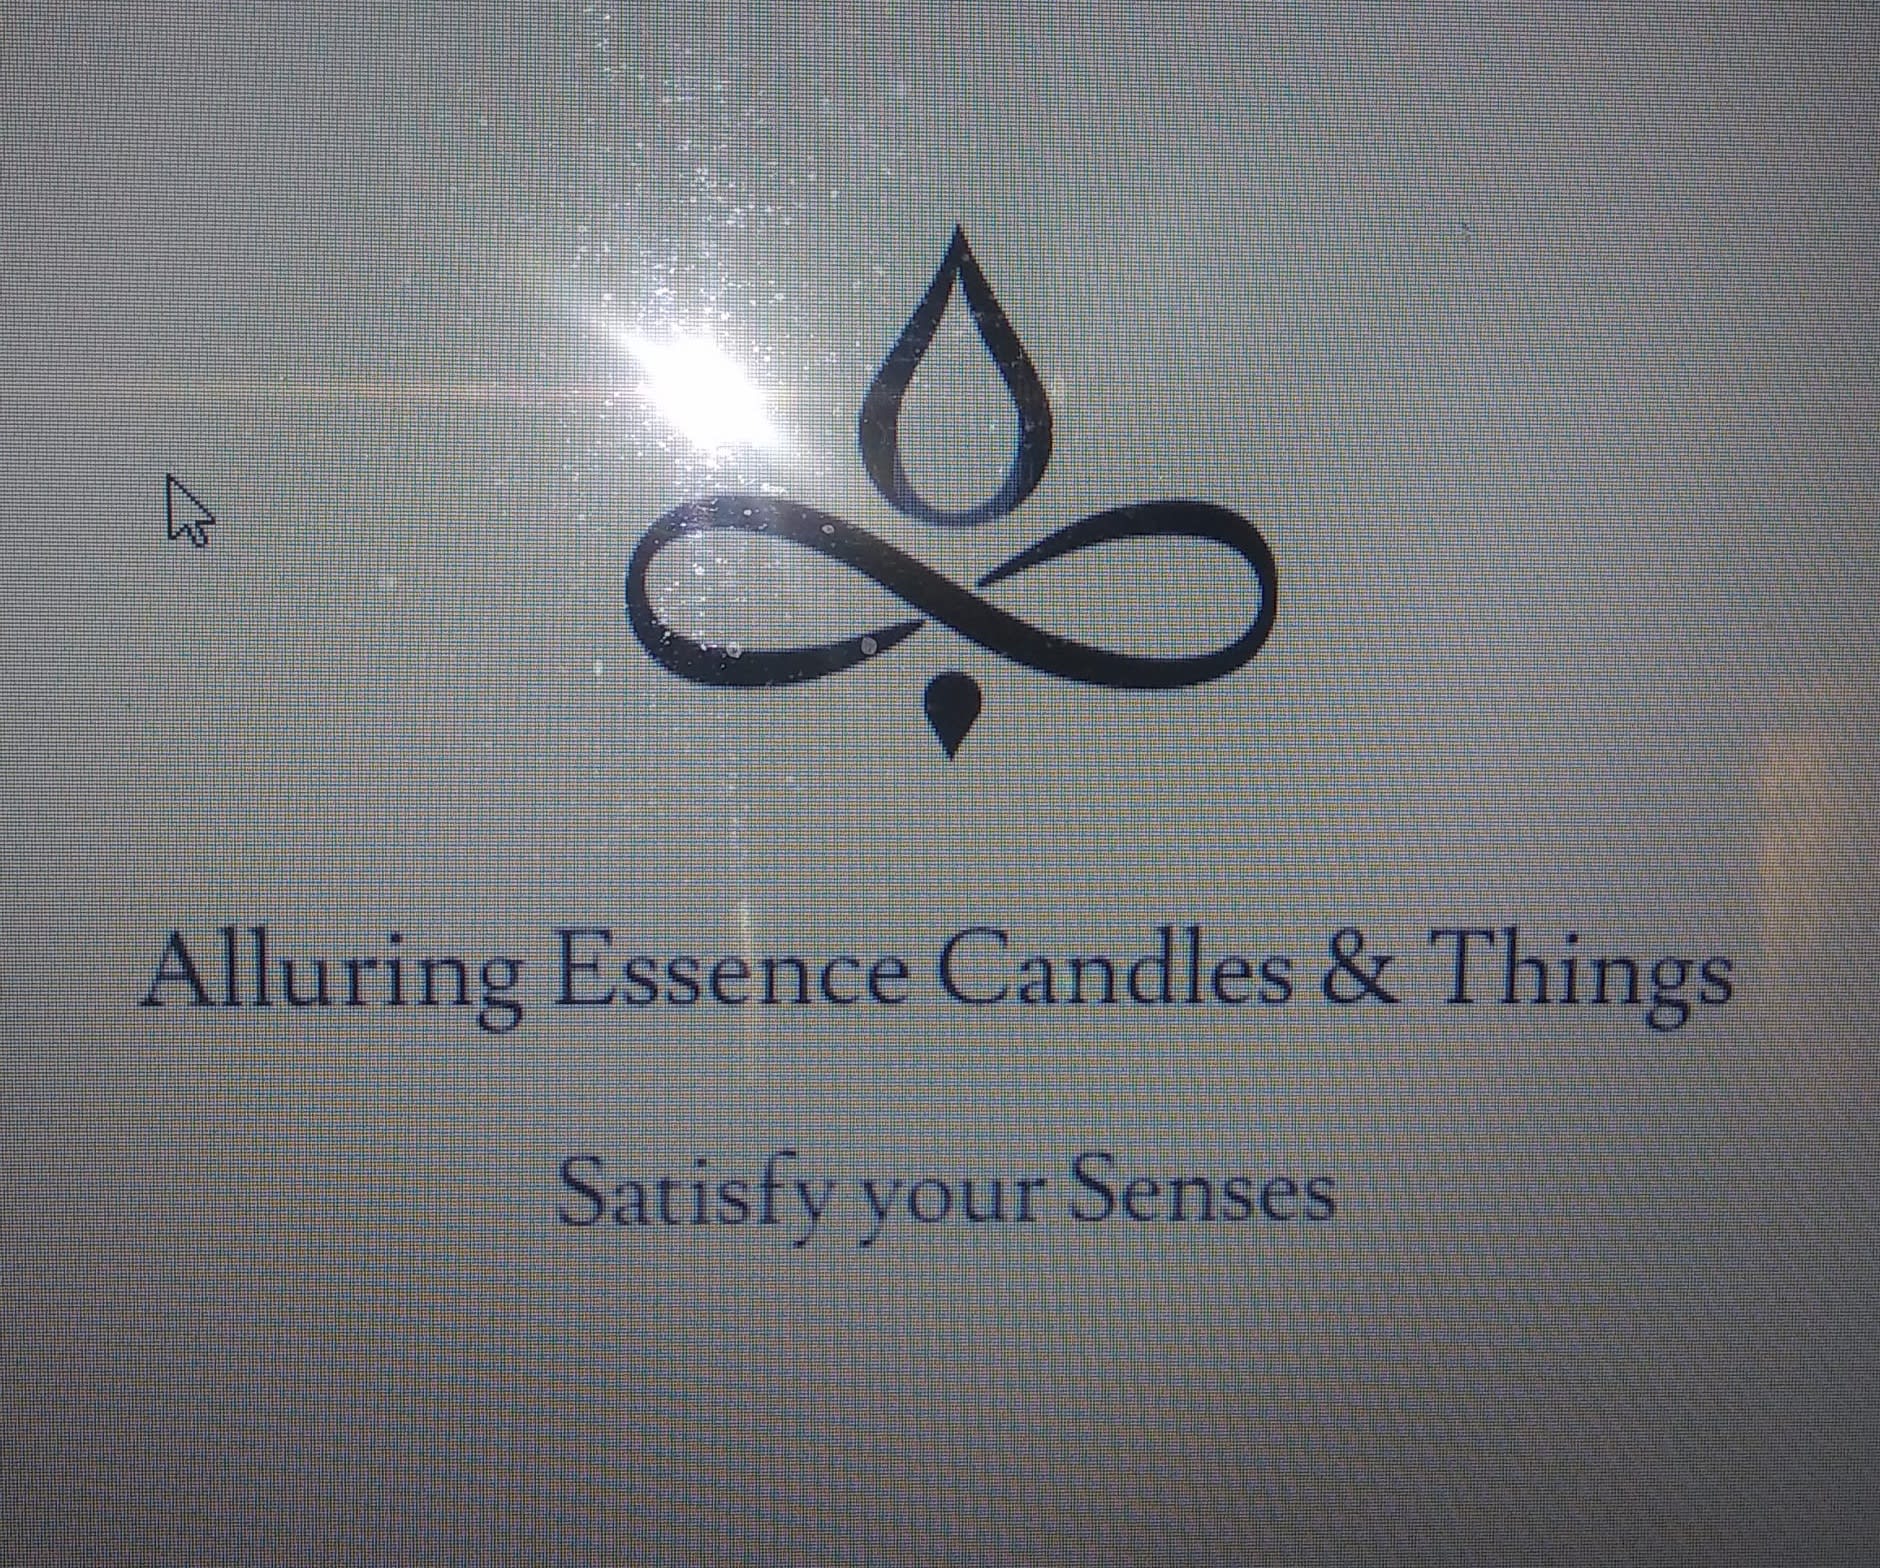 Alluring Essence Candles & Things